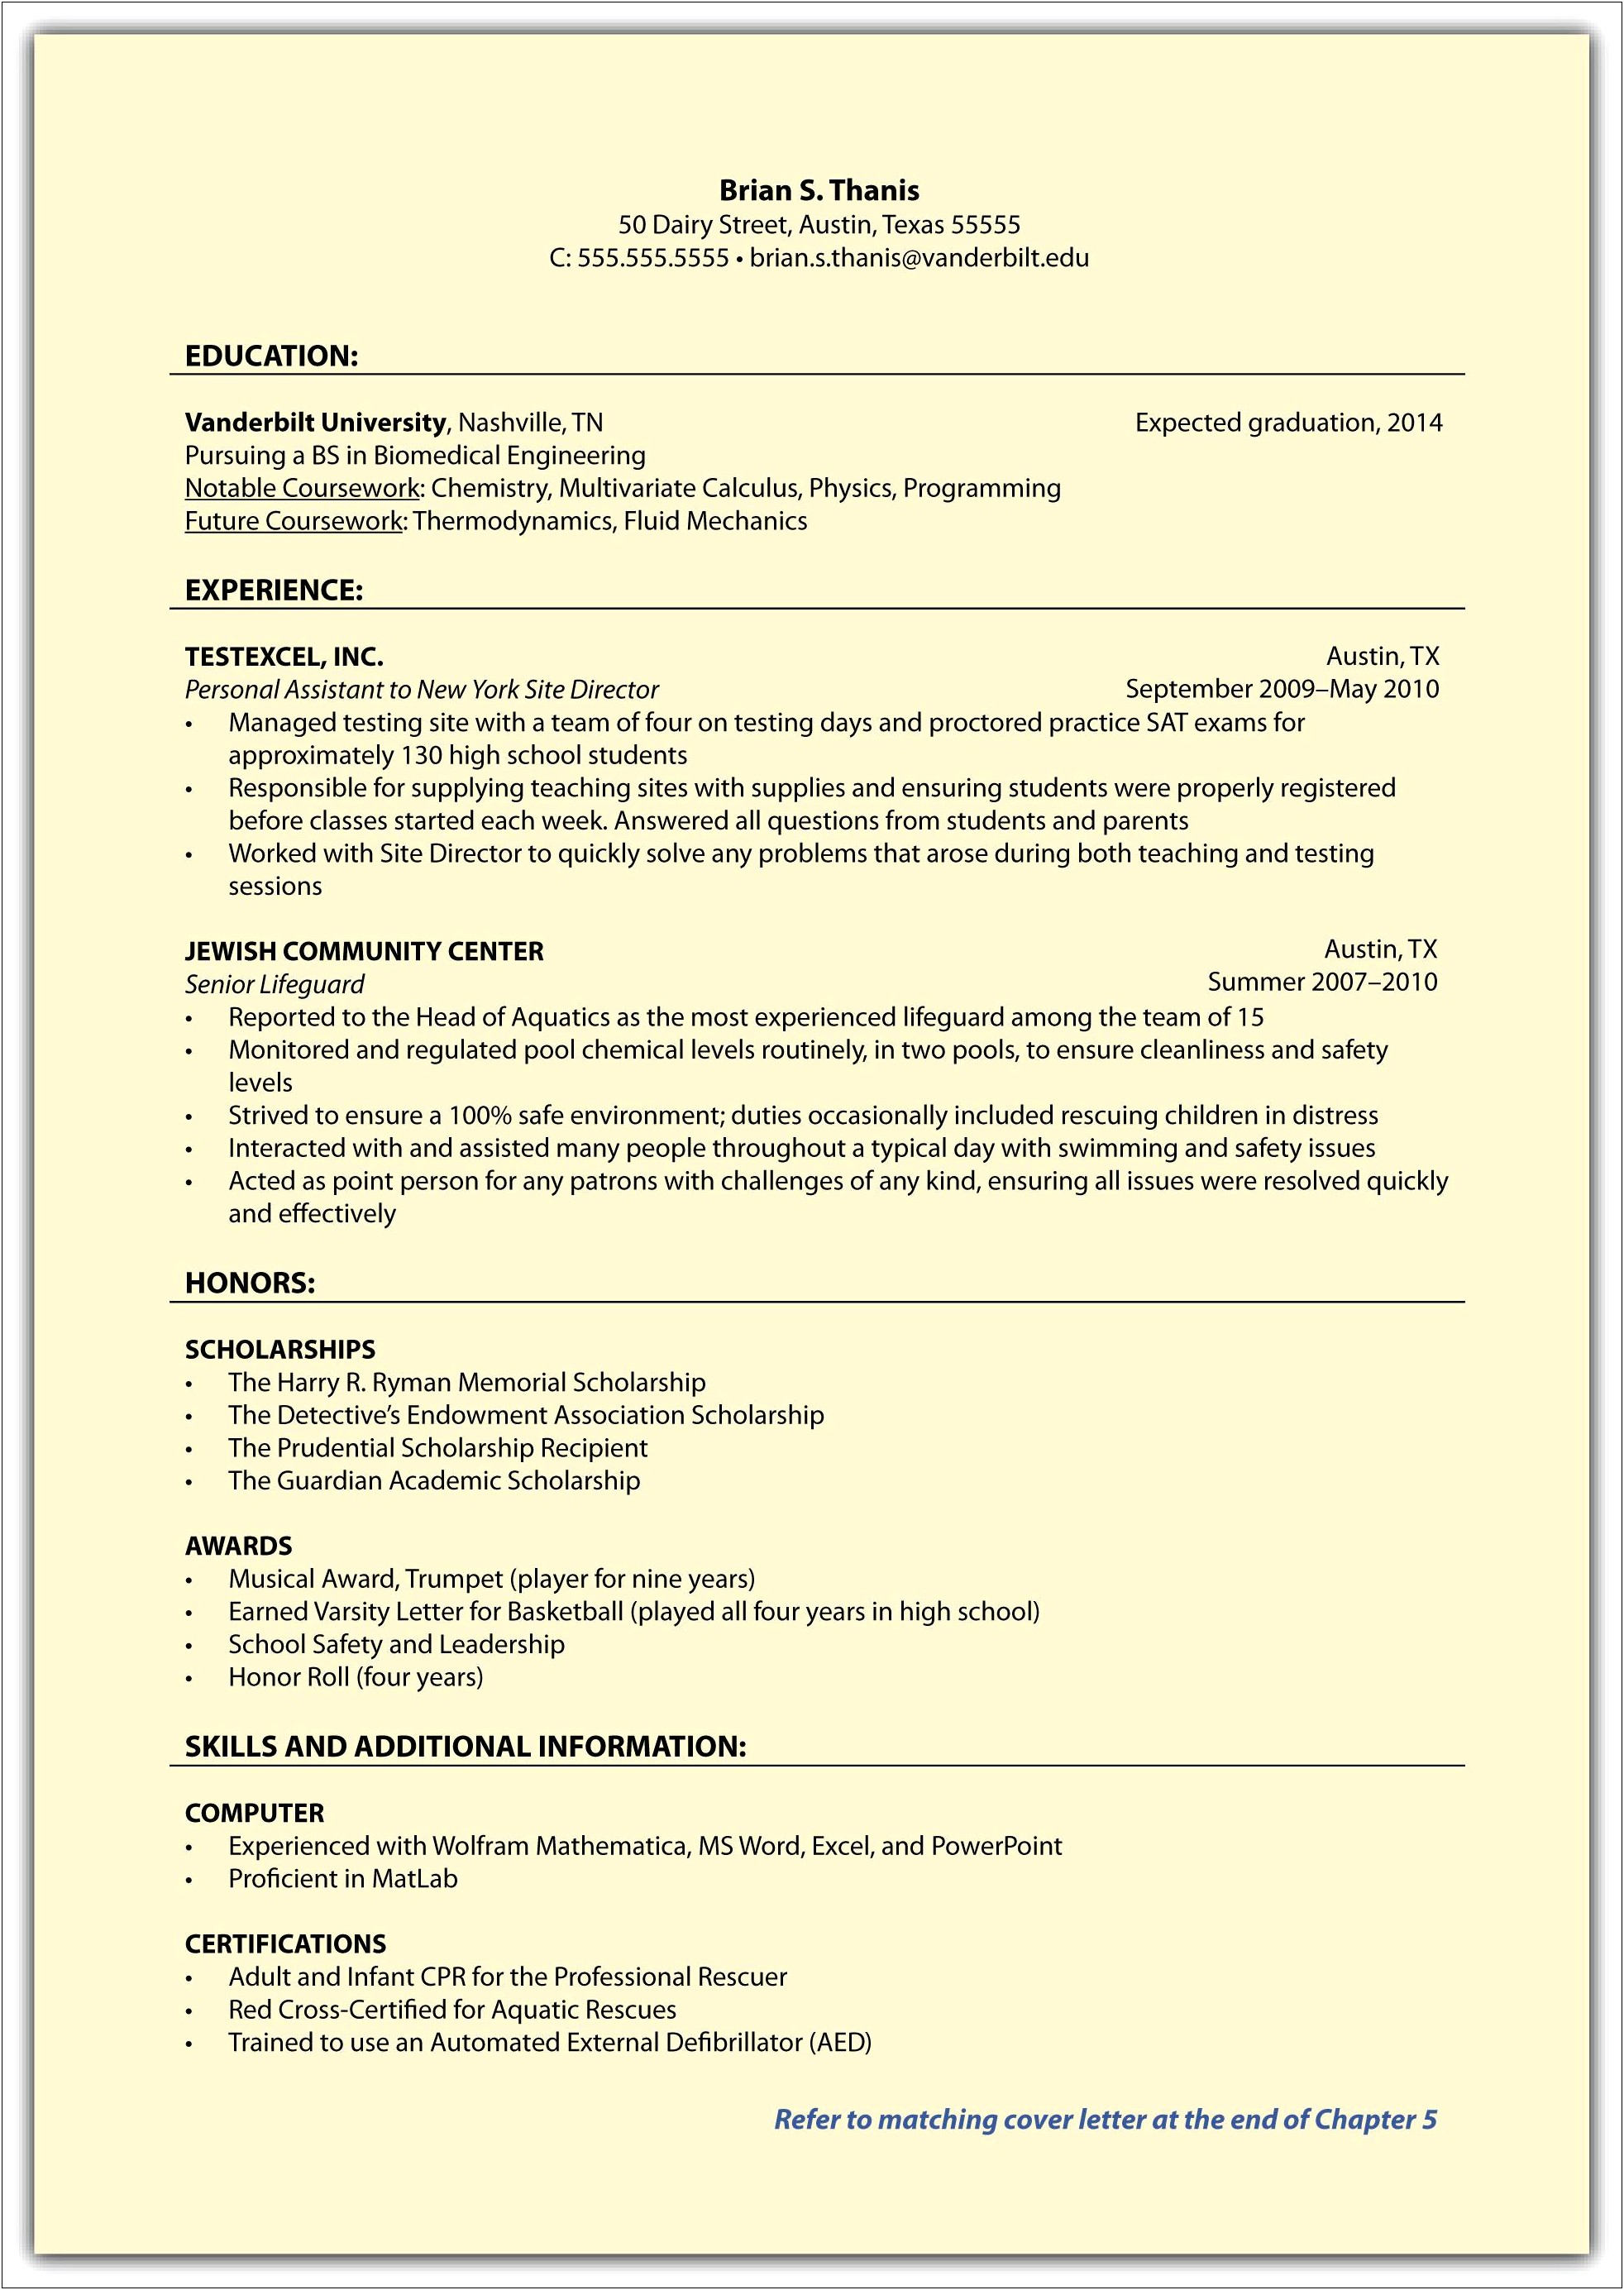 Free Resume Sites For Employers India